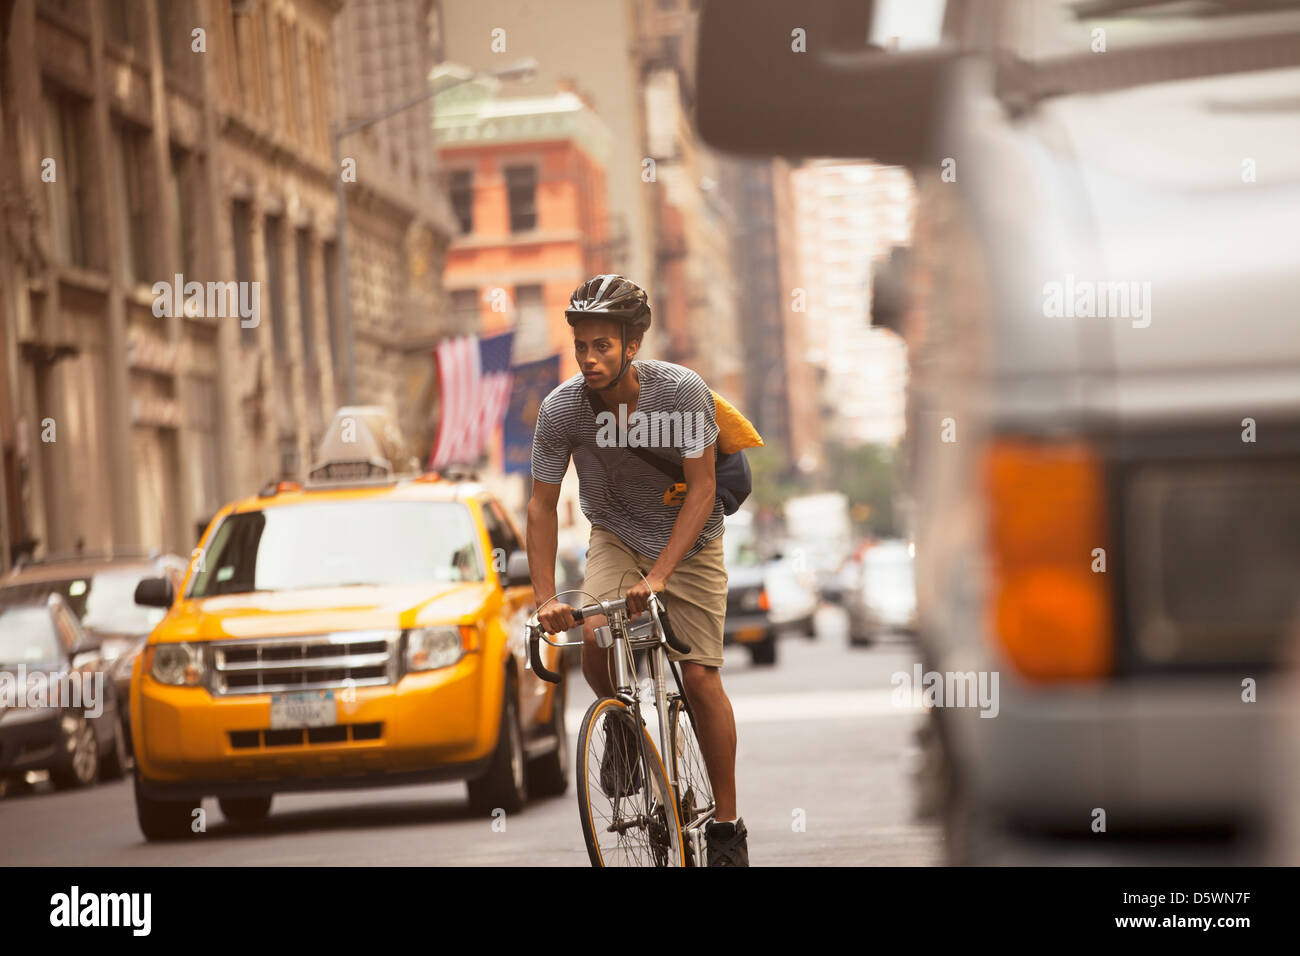 Man riding bicycle on city street Banque D'Images